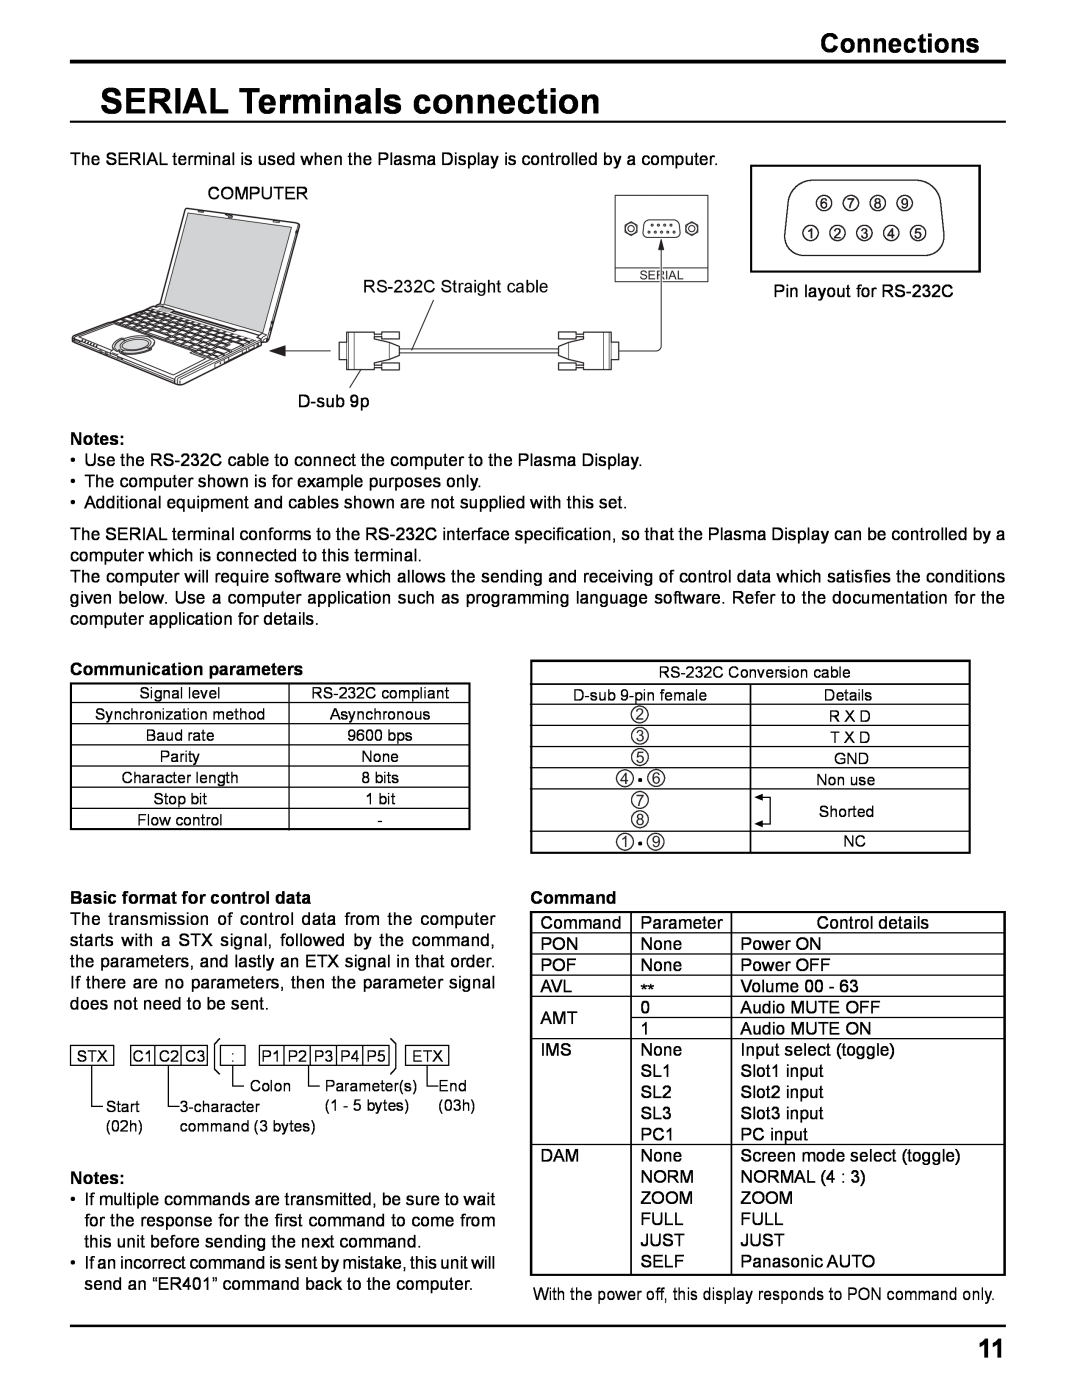 Panasonic TH-50PHD8UK SERIAL Terminals connection, Connections, Communication parameters, Basic format for control data 